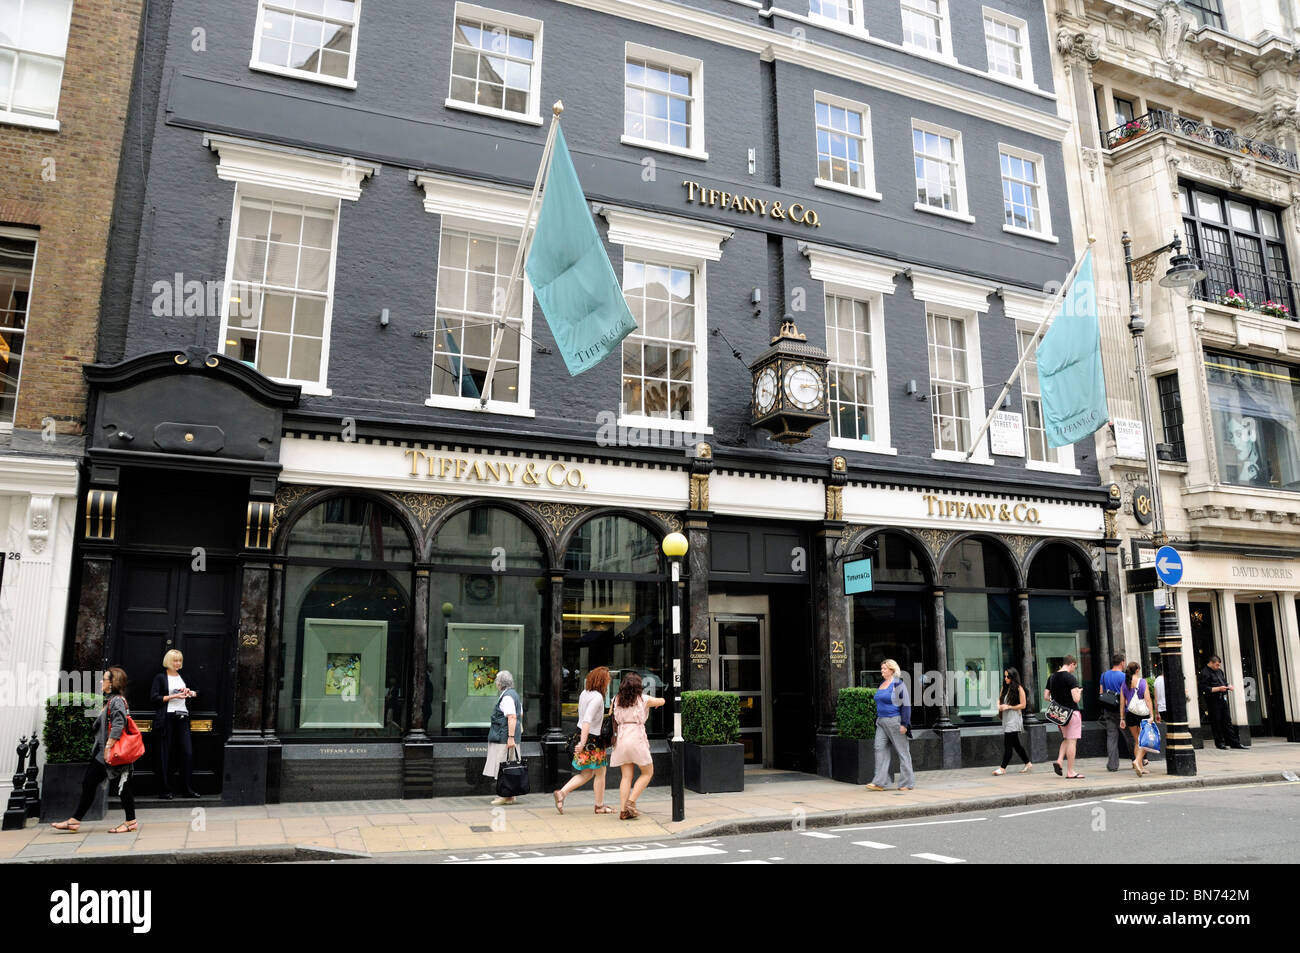 tiffany and co in london